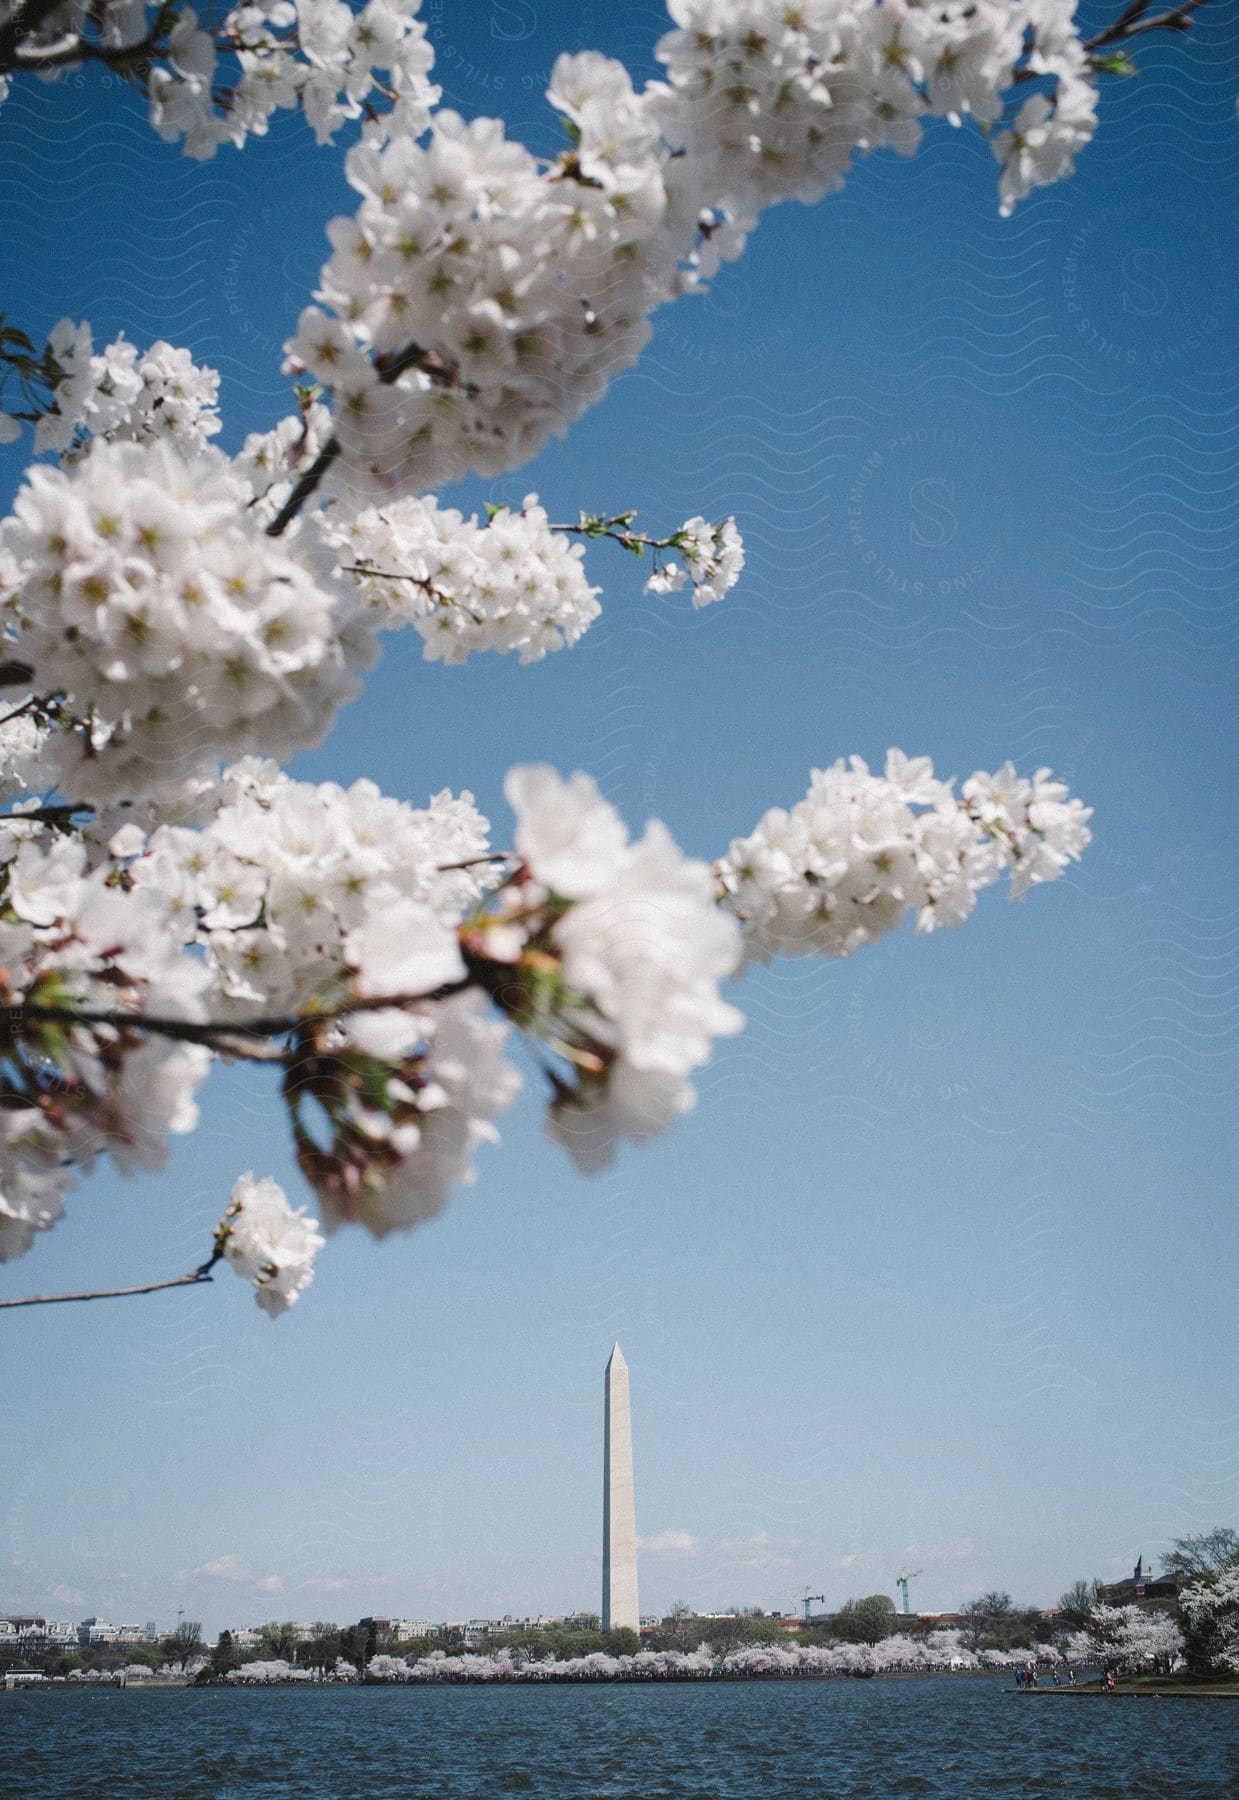 Branches of trees in bloom, with lush white flowers, against a blue sky. In the background, an obelisk stands out, indicating an important monument or landmark.